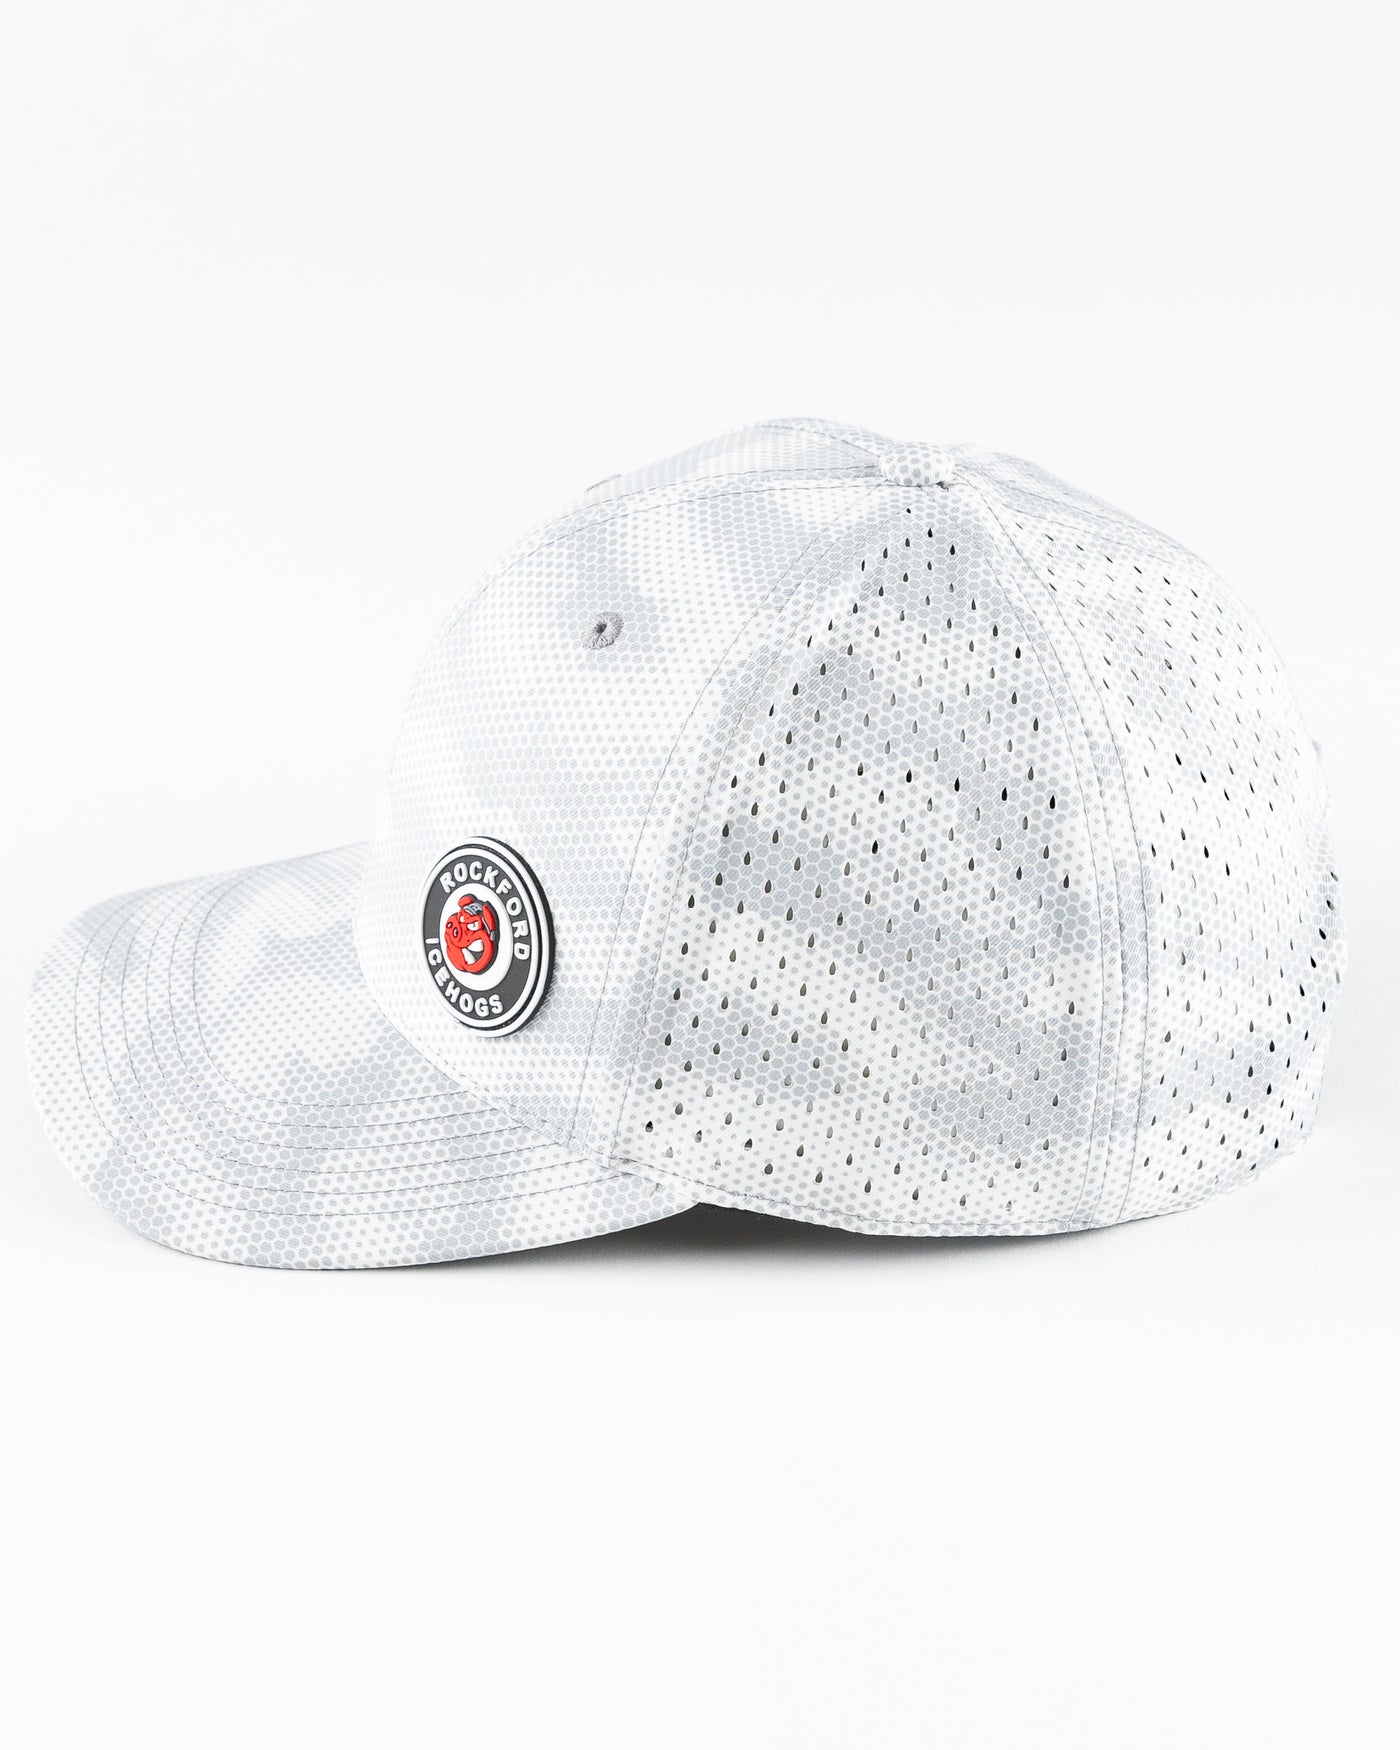 grey Rockford IceHogs adjustable cap with grey camo dot design and rubber patch on front panel - left lay flat